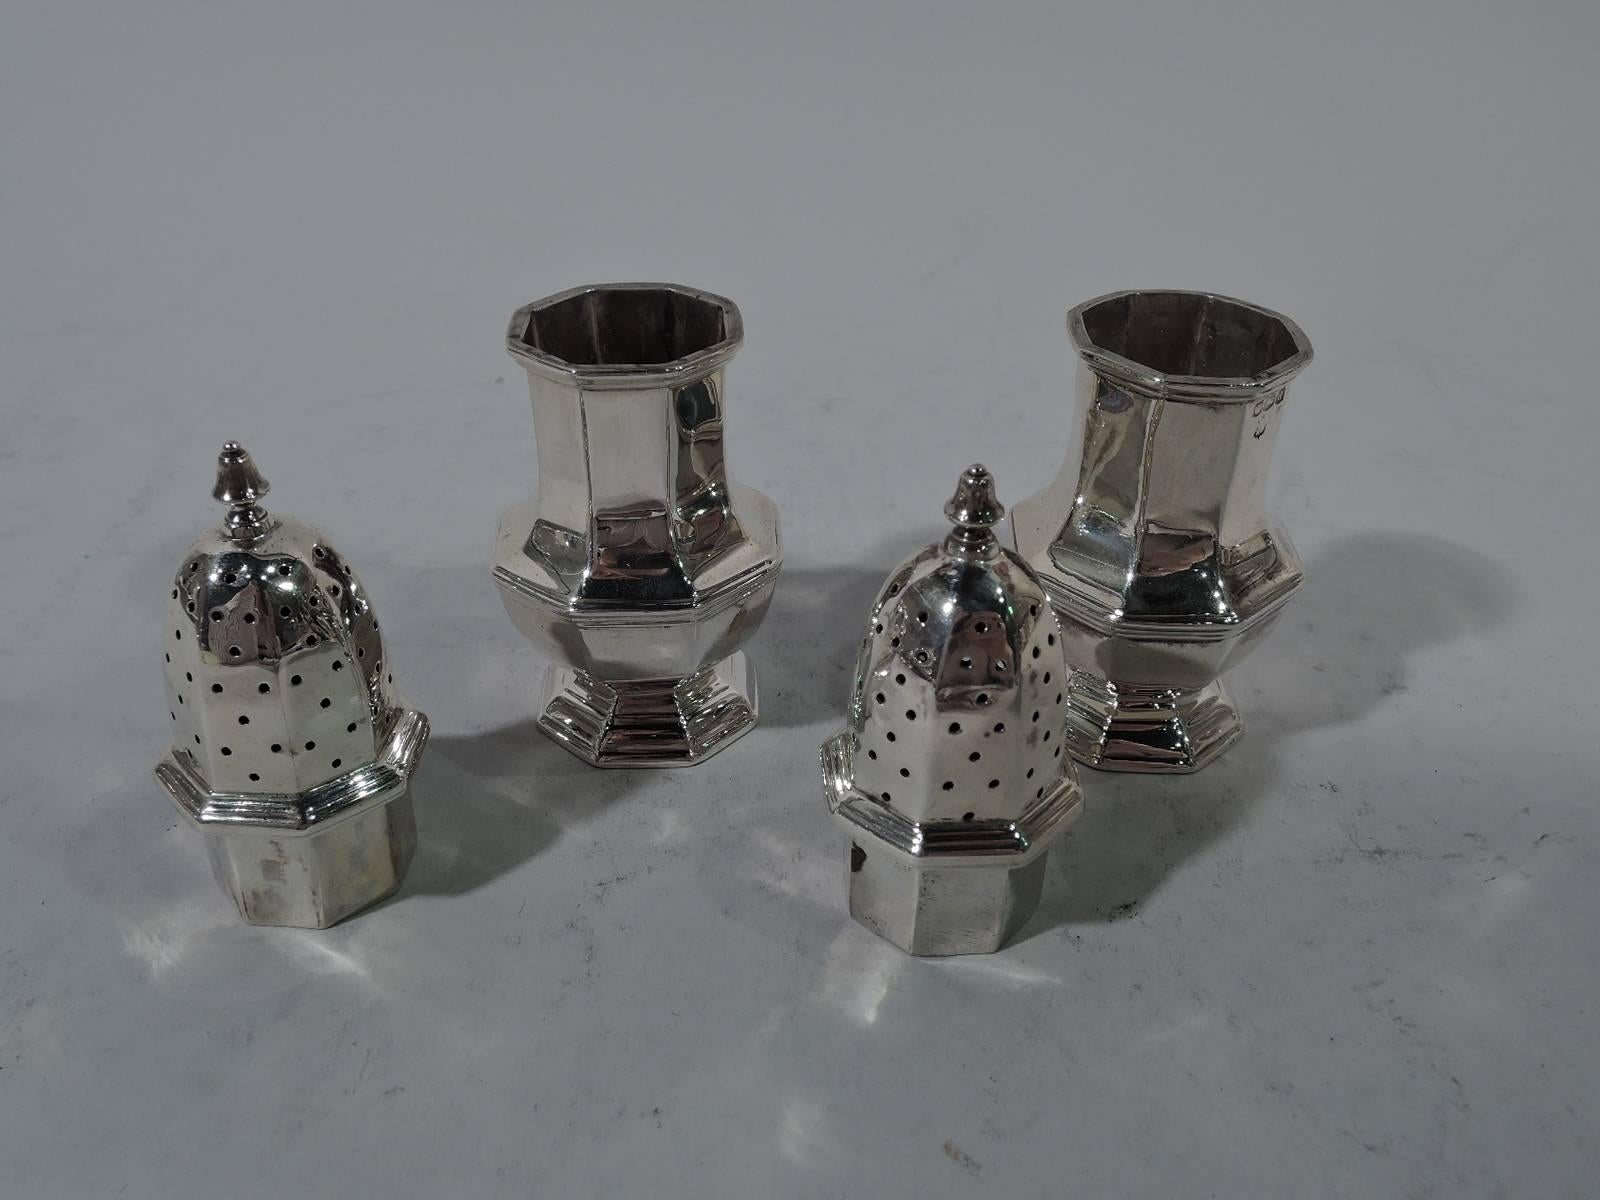 Pair of Art Deco sterling silver salt and pepper shakers. Made by Thomas Bradbury in Sheffield. Each: Faceted baluster and raised foot. Pierced domed cover and bell finial. A nice pair that combines traditional form and geometric innovation.